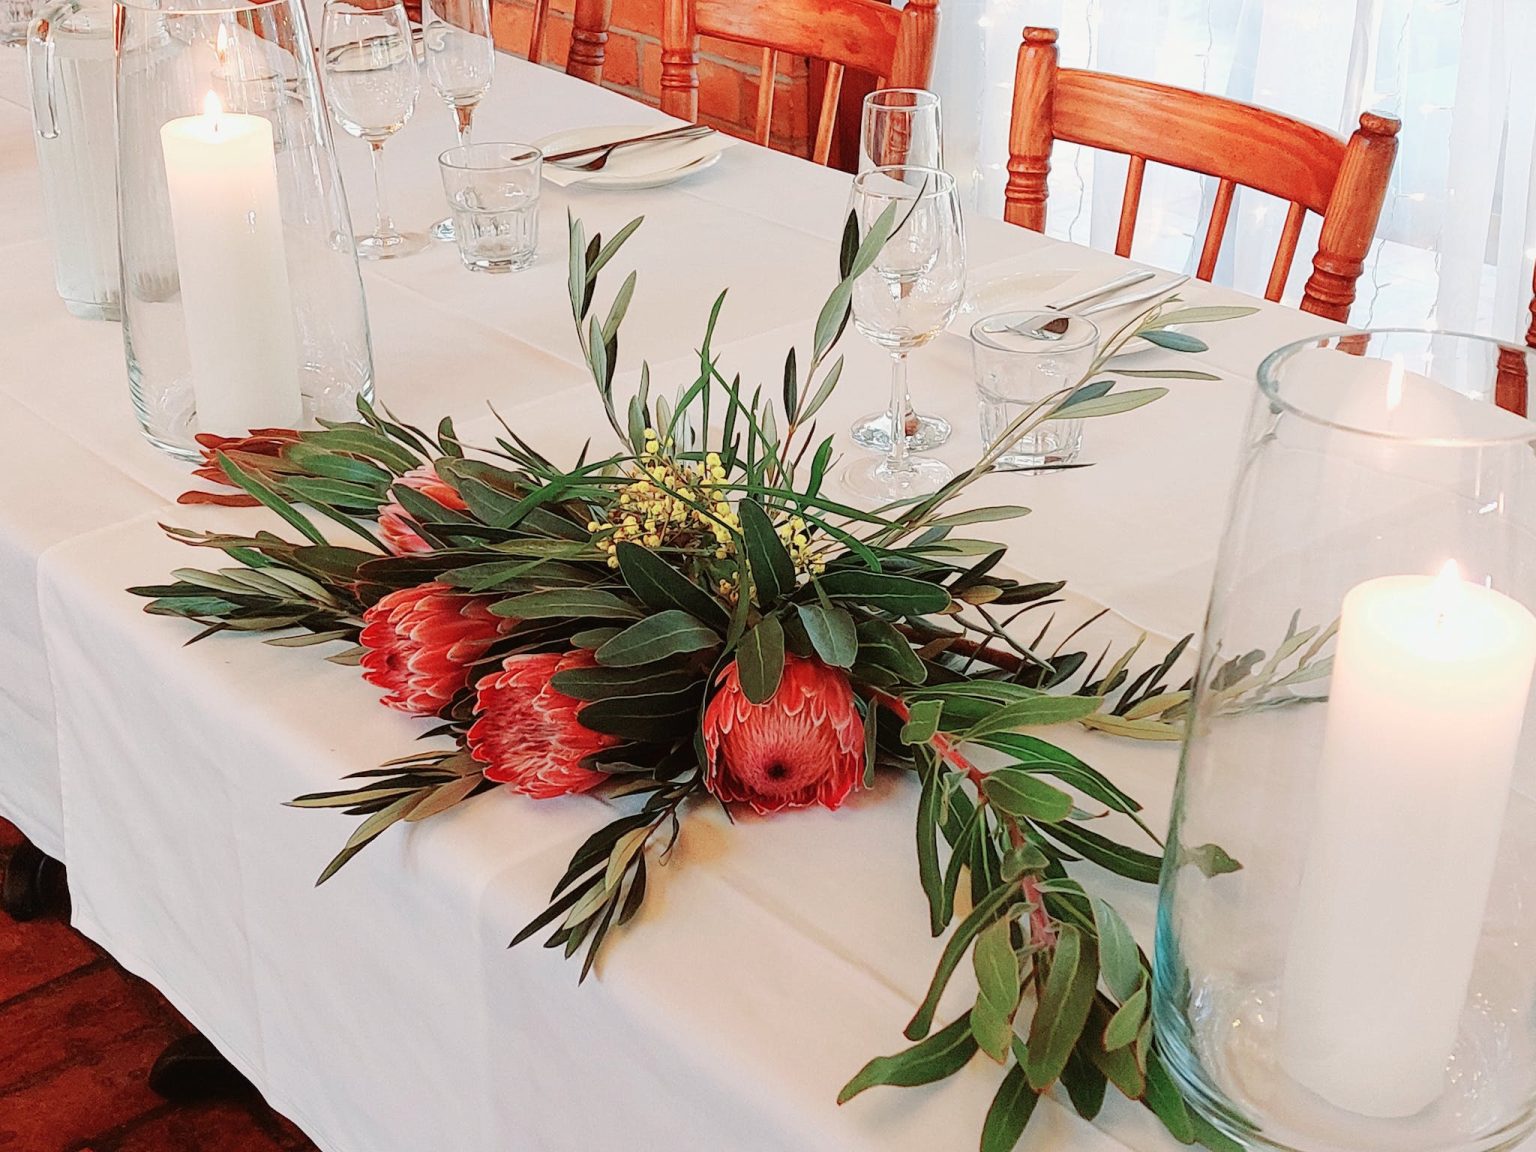 Natife flower arrangement on a white tablecloth with candles